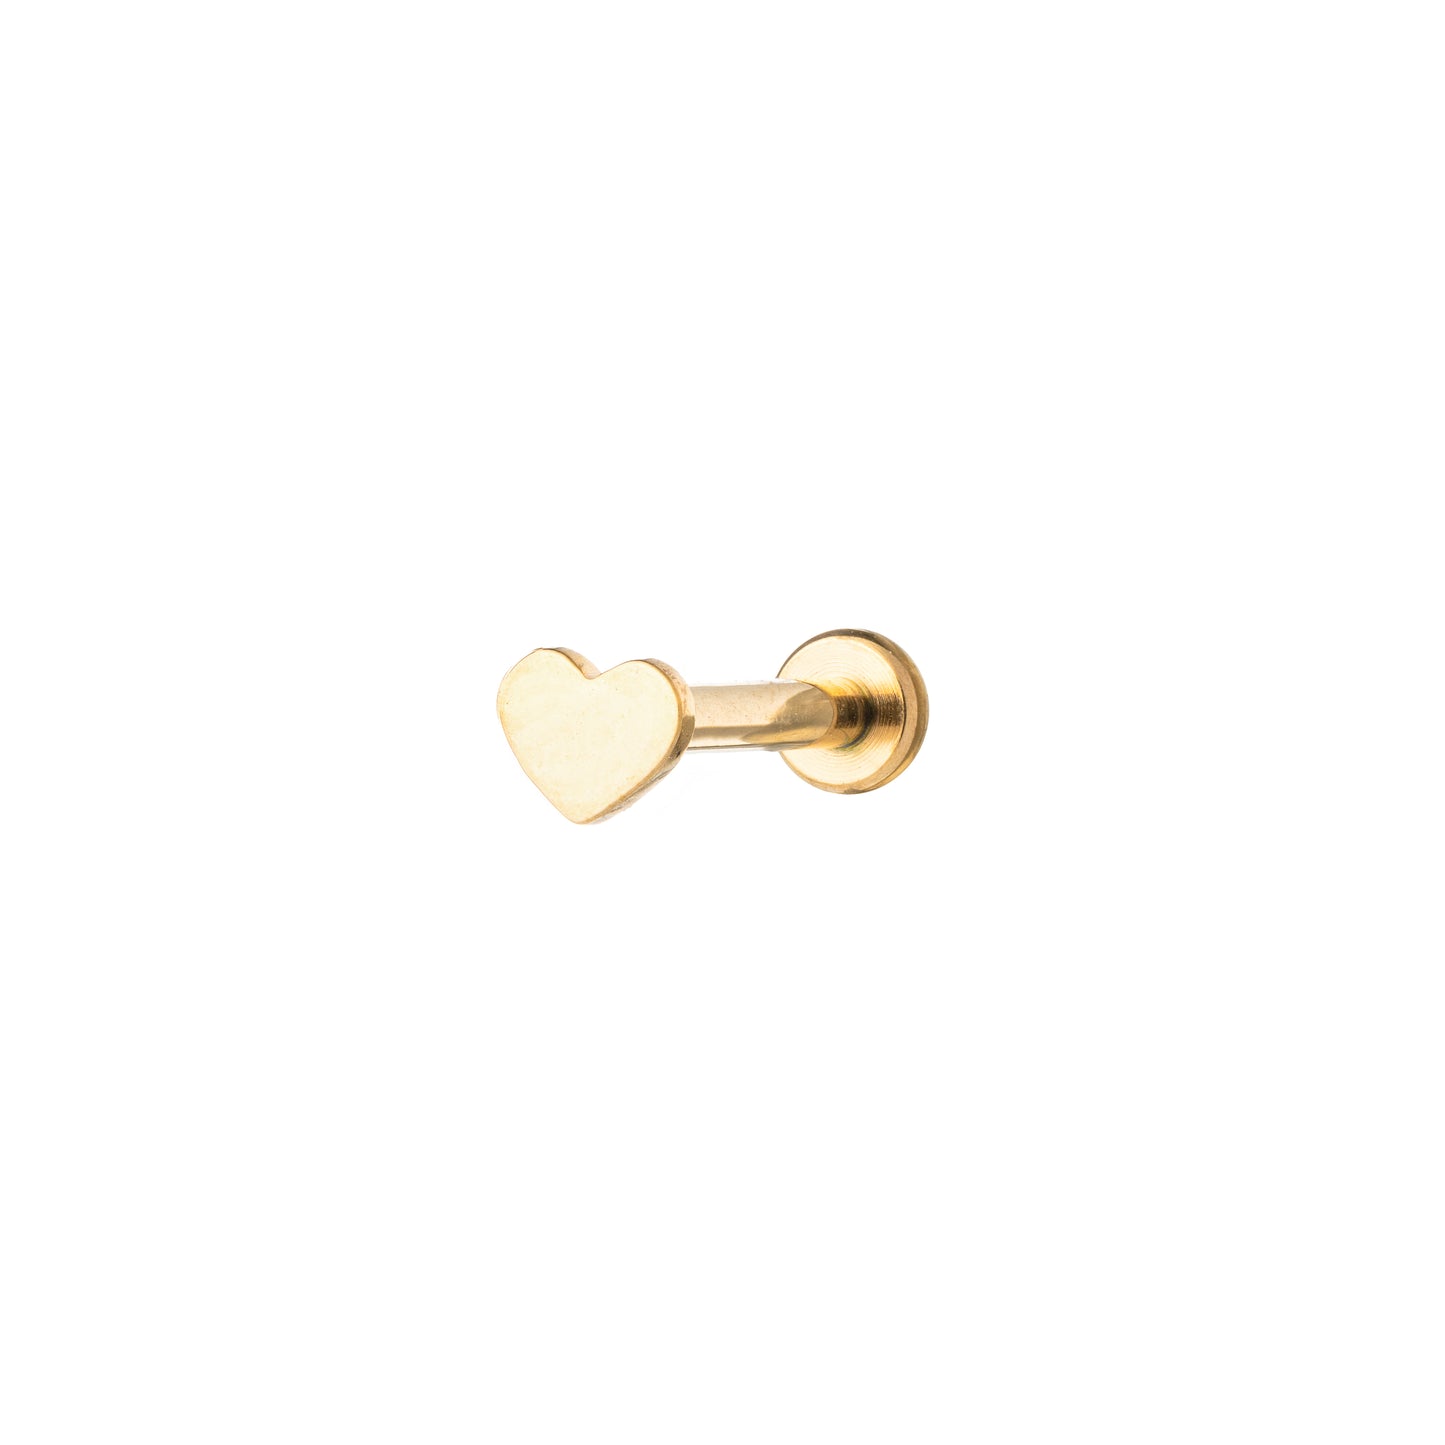 Titanium Gold PVD Plated Int. Threaded Labret With Heart Top